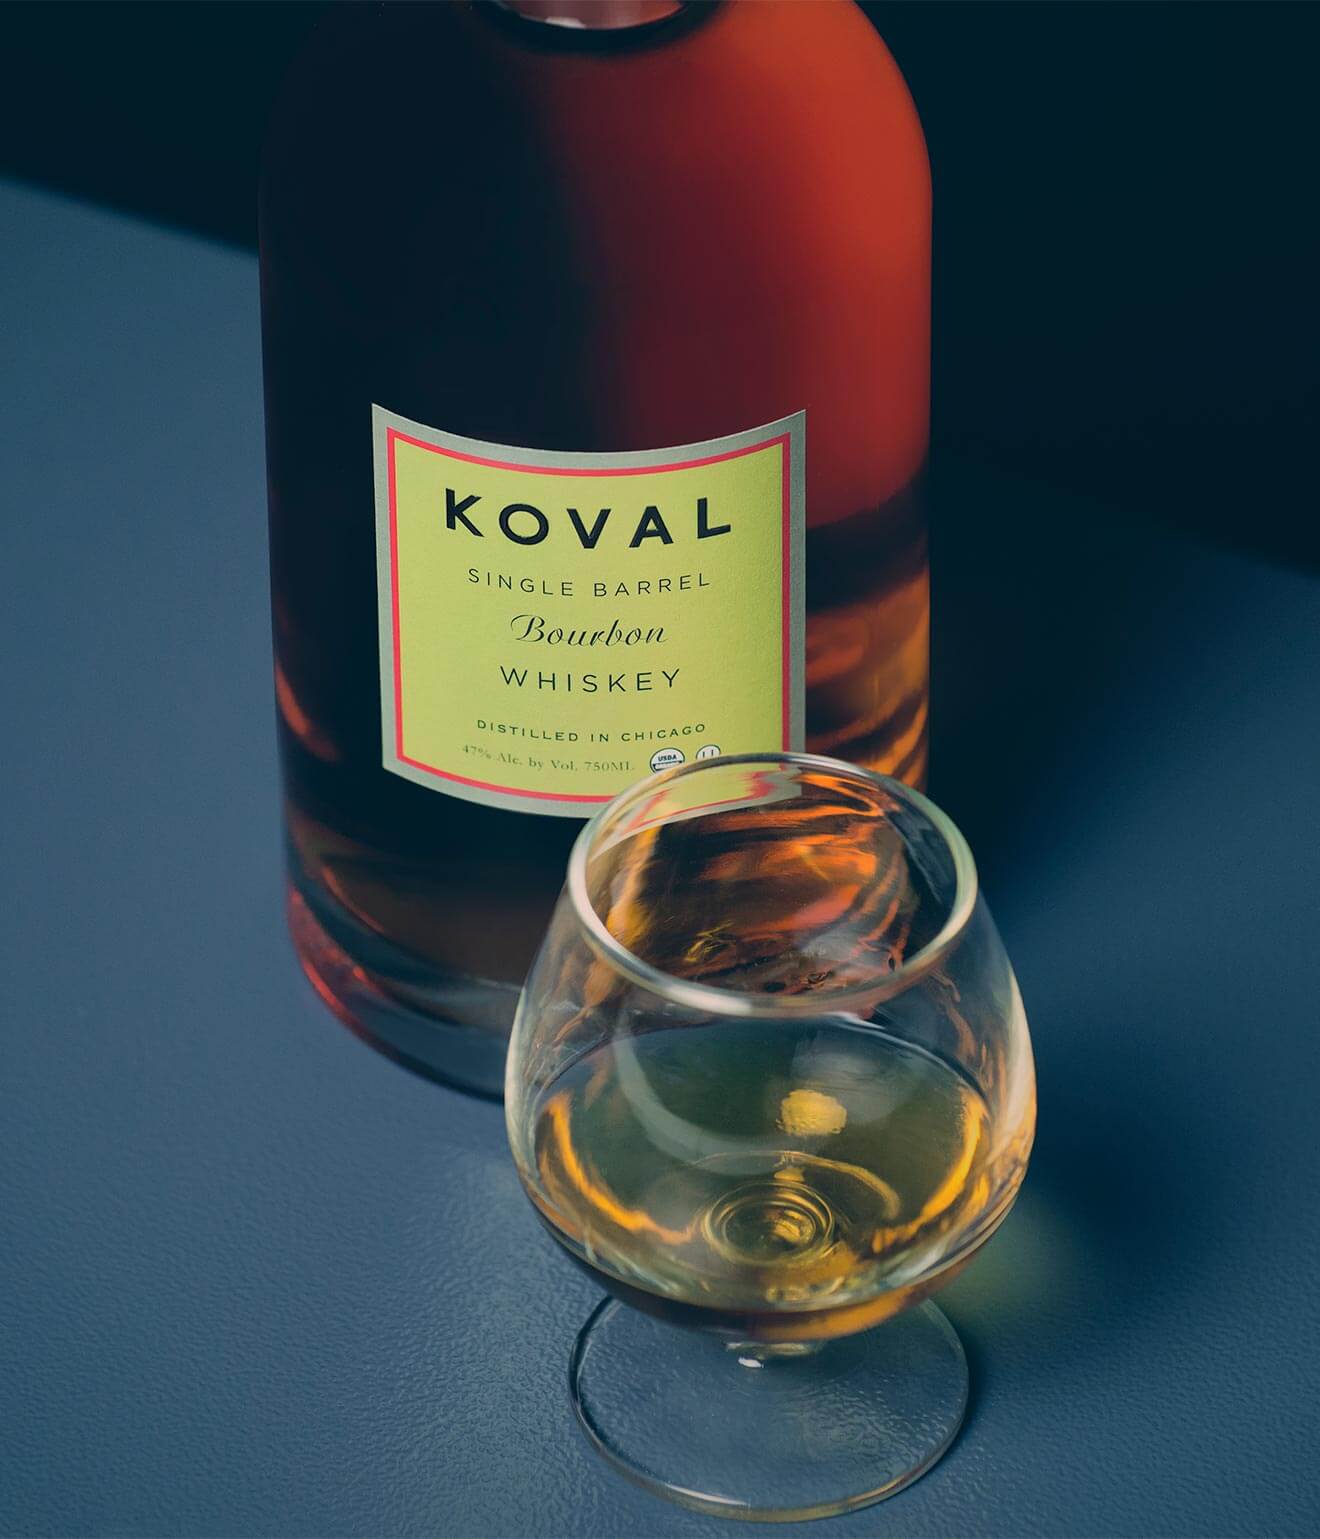 Koval Bourbon, bottle and glass